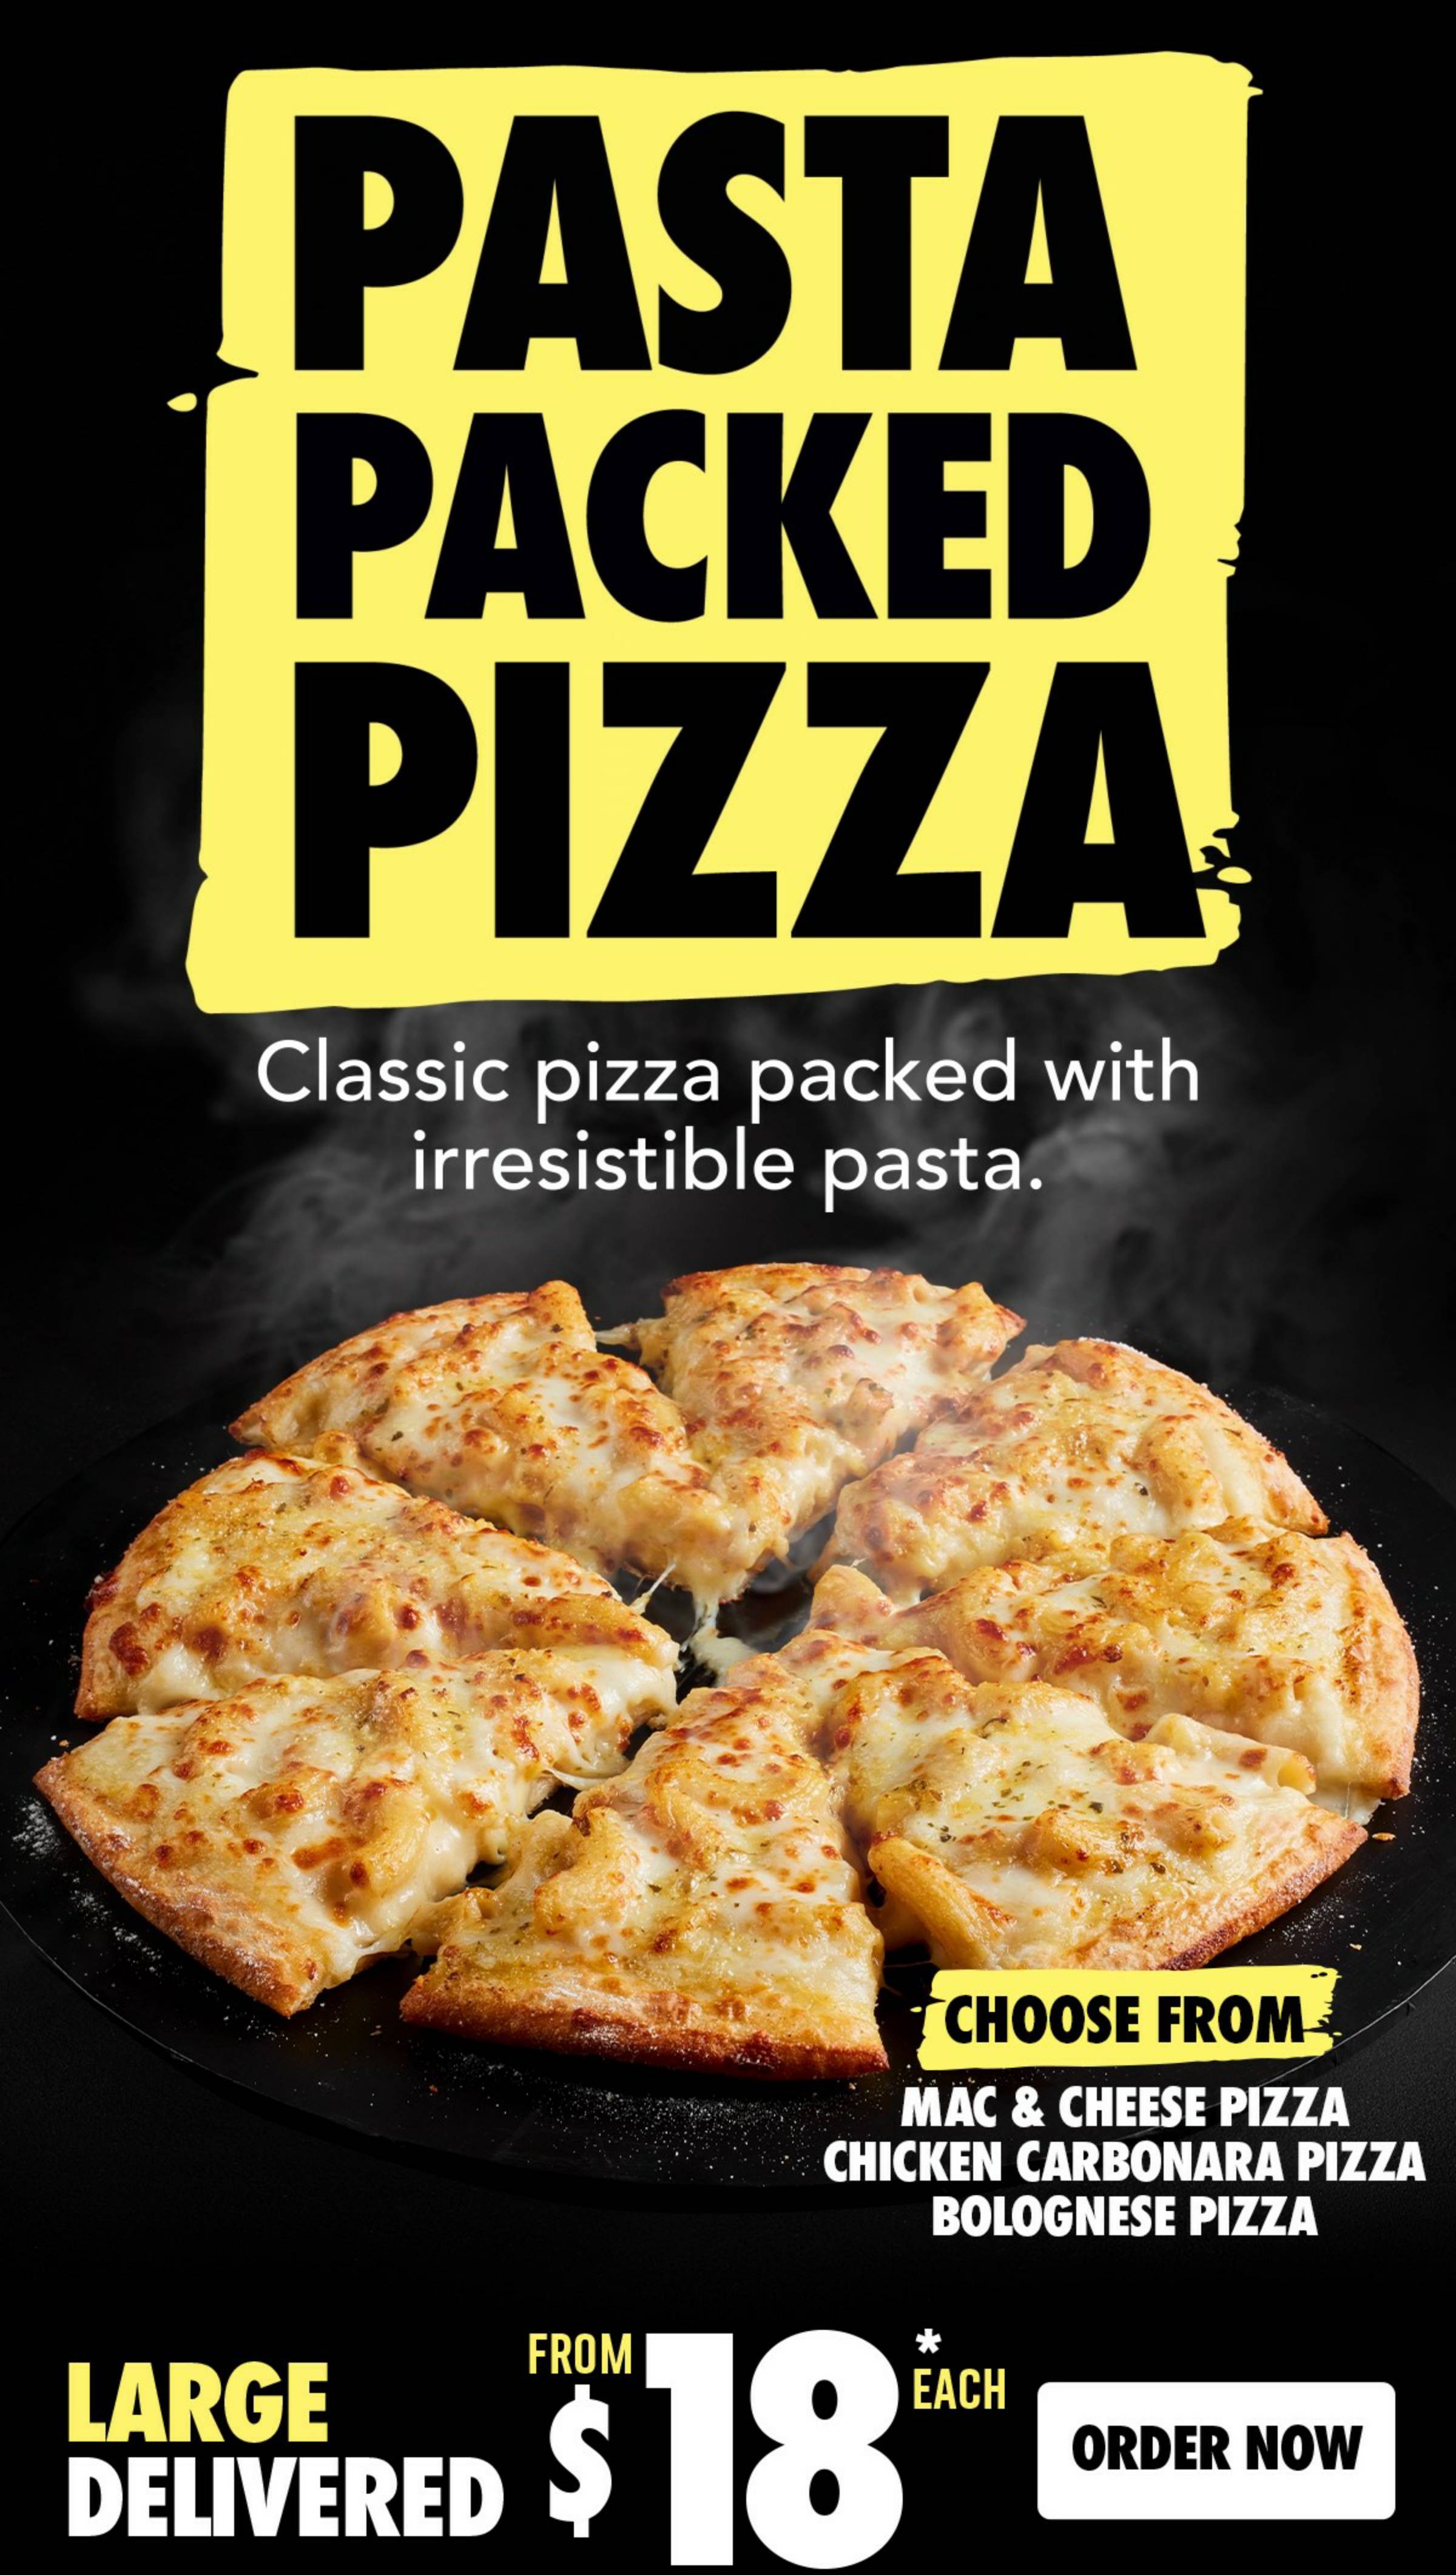 Domino's - Domino’s Pasta Packed Pizza $18 Delivered